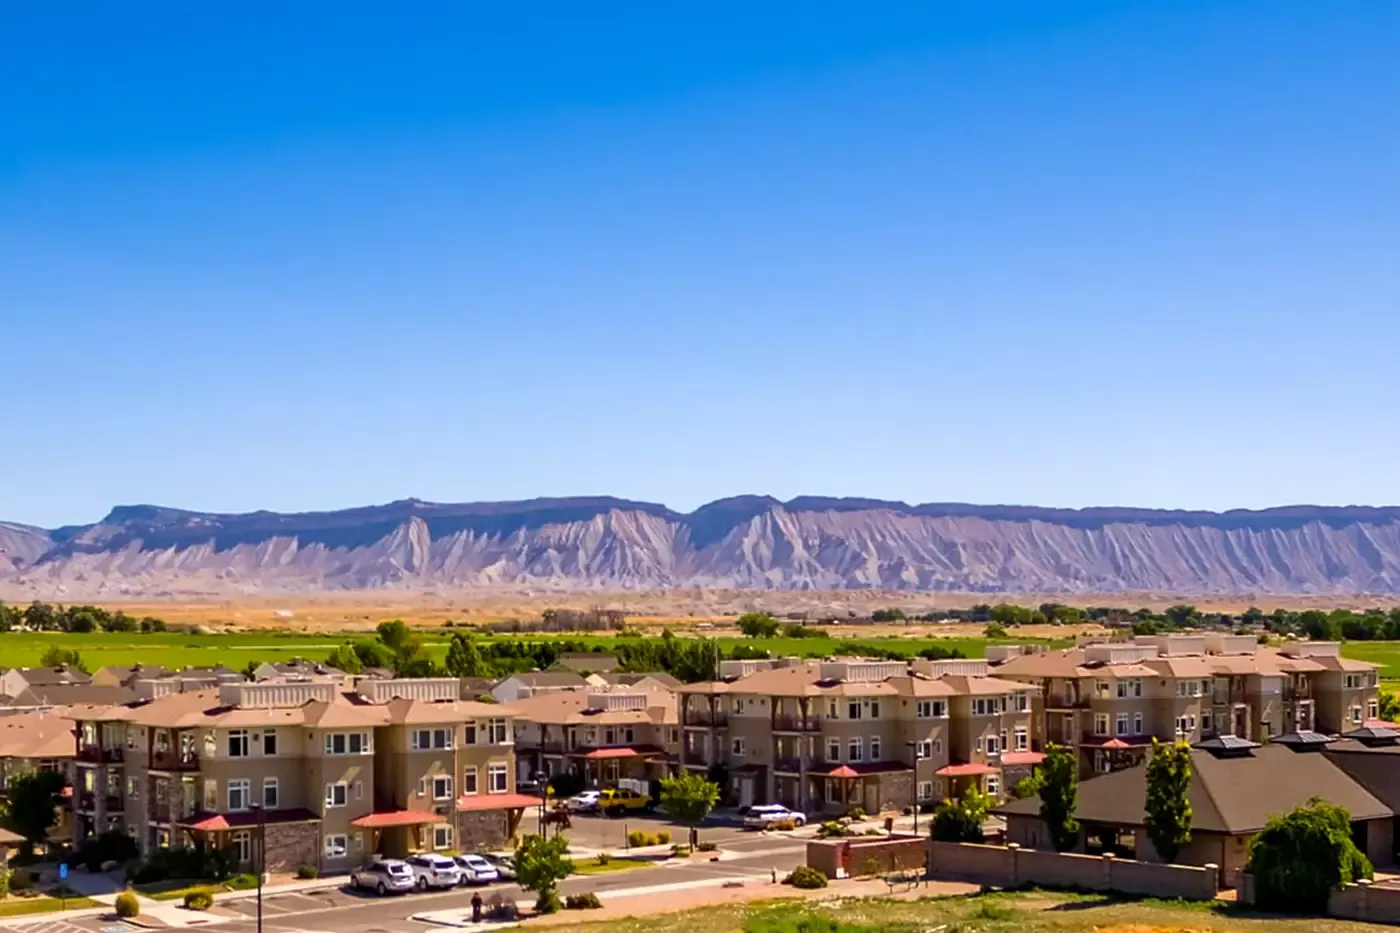 Photo of the Village Park Apartments in Grand Junction, CO